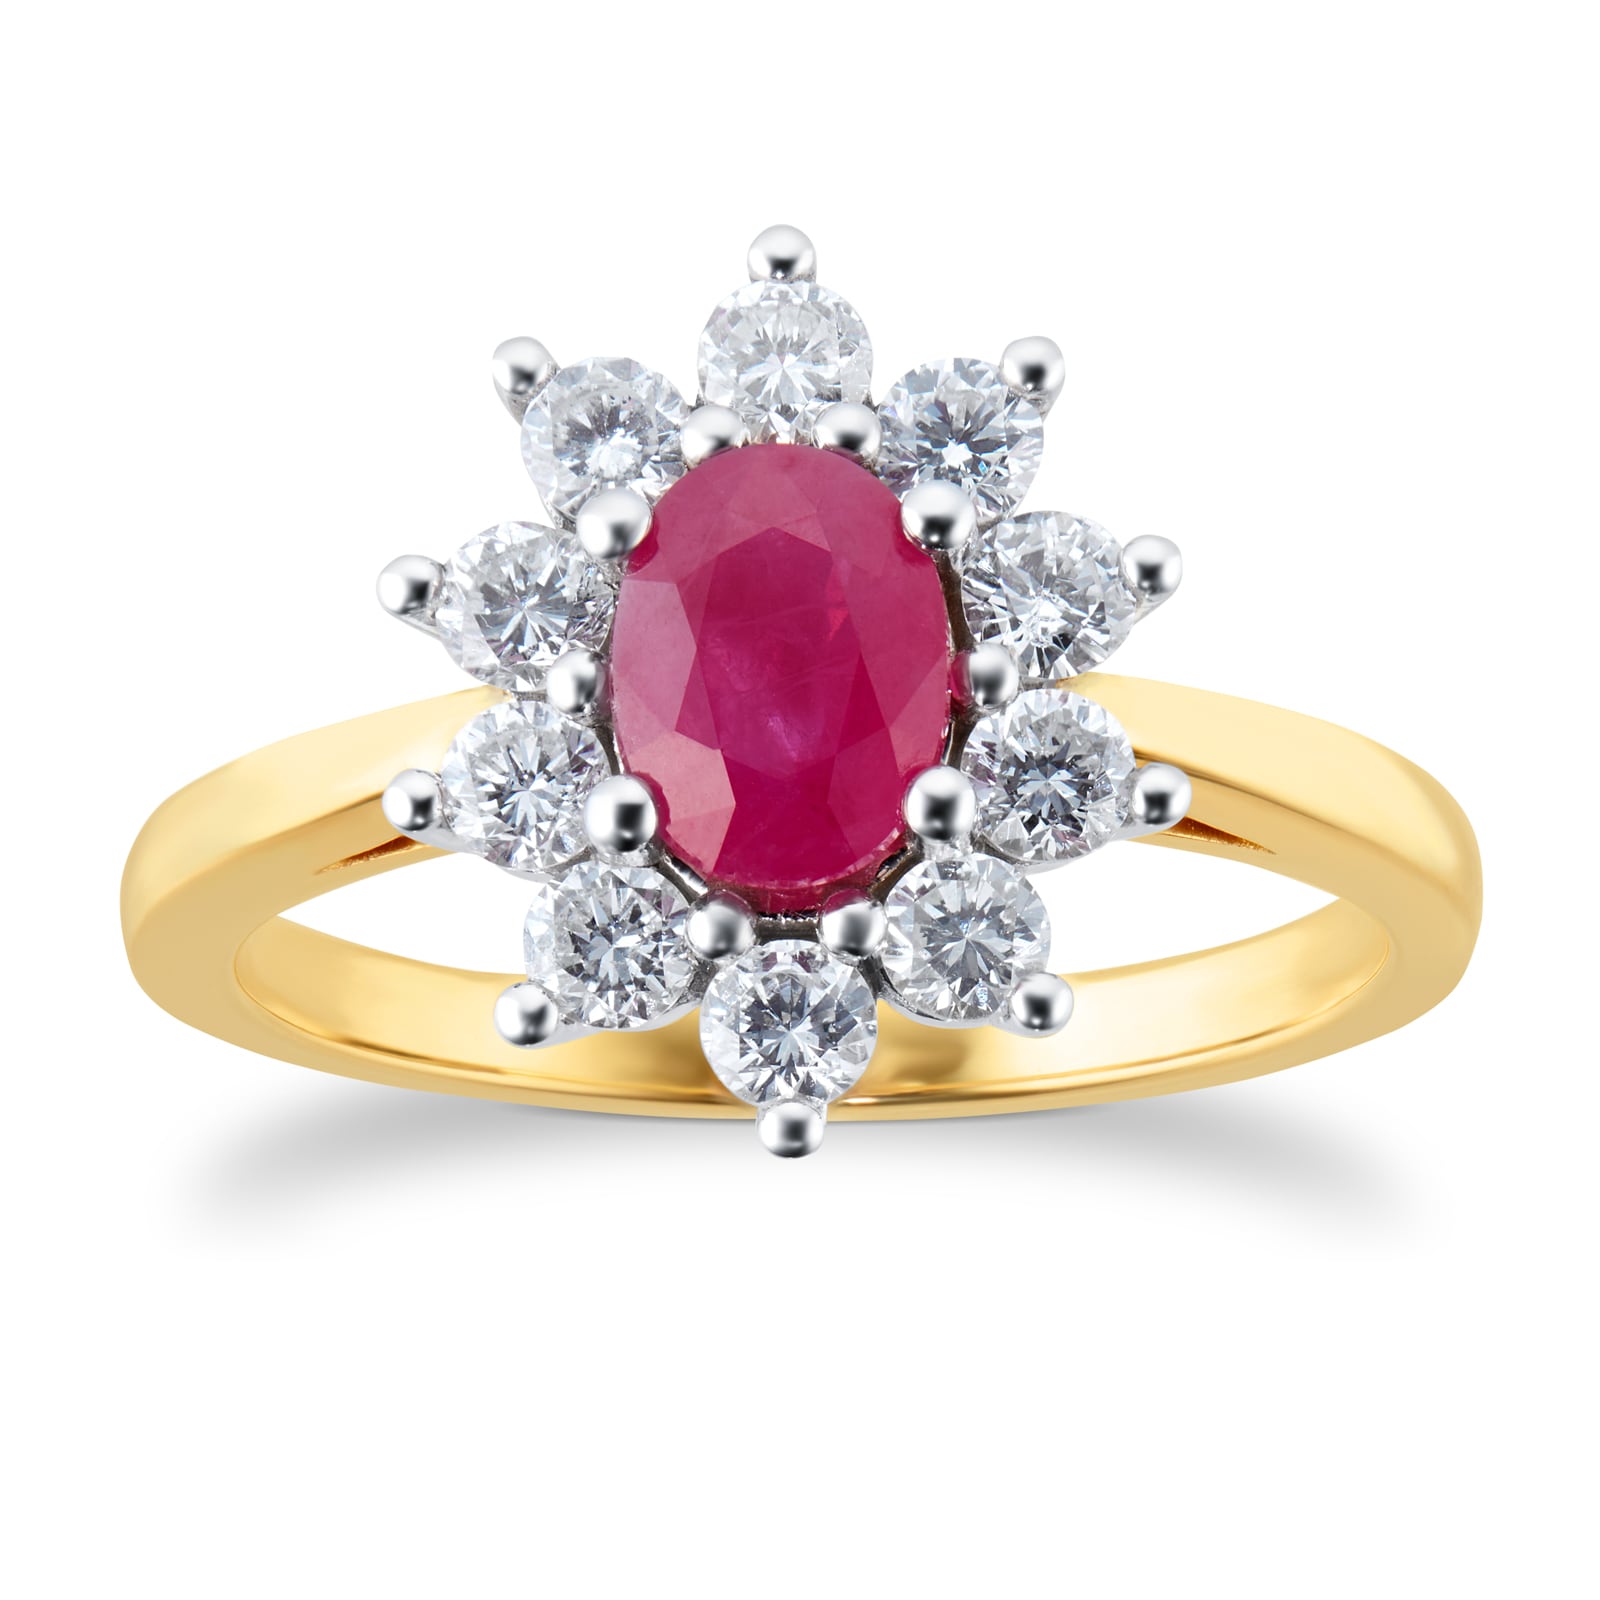 18ct Yellow and White Gold Ruby And Diamond Cluster Ring - Ring Size L.5